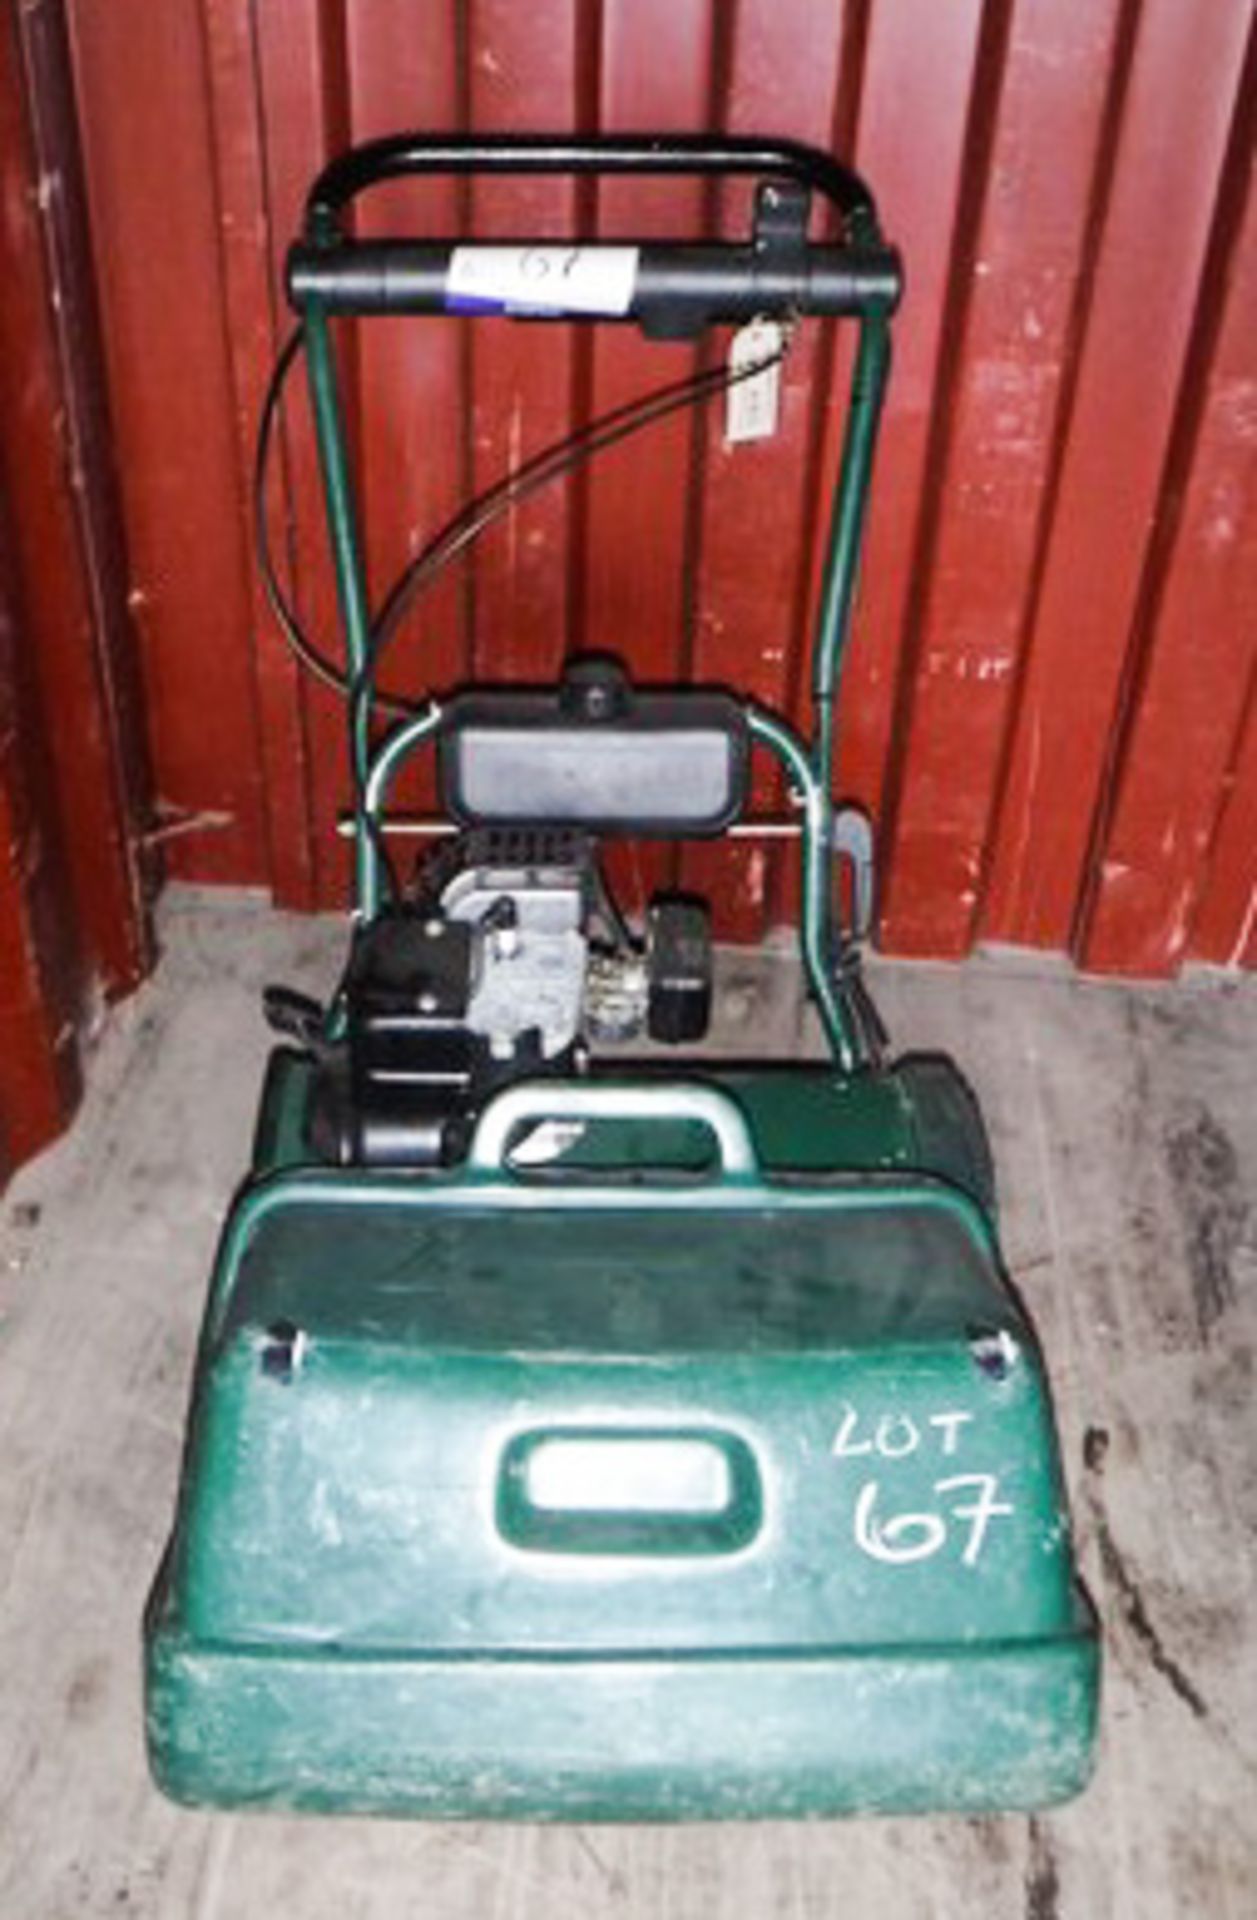 BALMORAL 17S CYLINDER MOWER C/W GRASS COLLECTION BOX, S/N 185000162, FLEET NO 2911 - Image 2 of 2